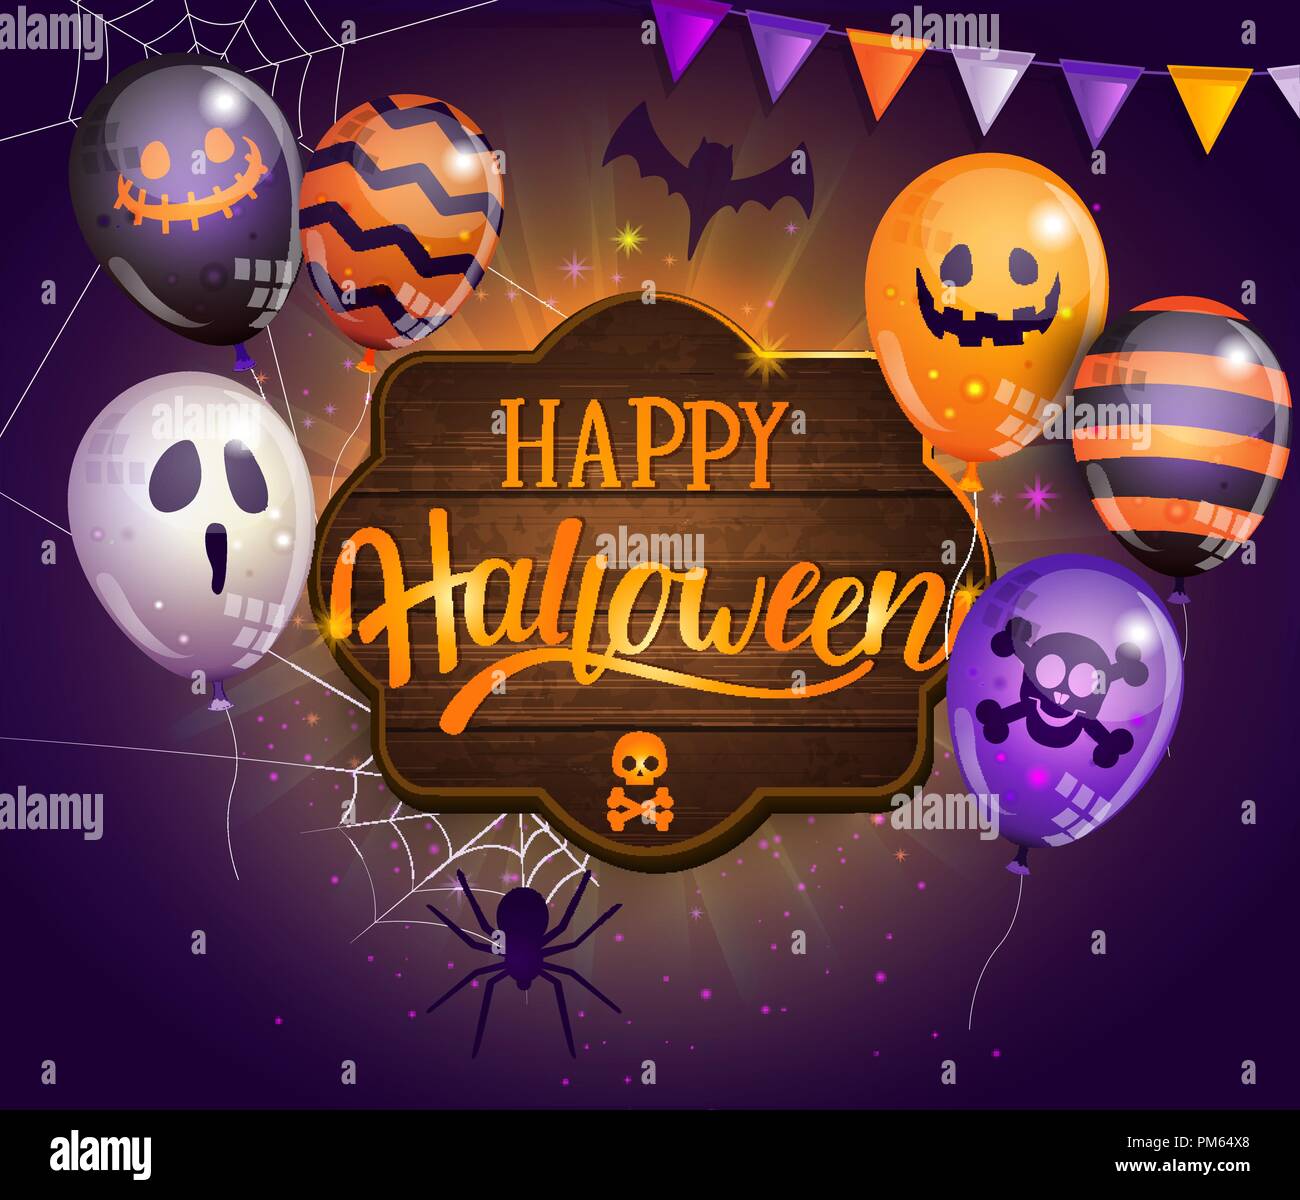 Invitation card for Happy Halloween party on wooden board with monster balloons, spider, bat and lettering. Perfect for for web, posters, placards, flyers, banners, greetings. Vector illustration. Stock Vector